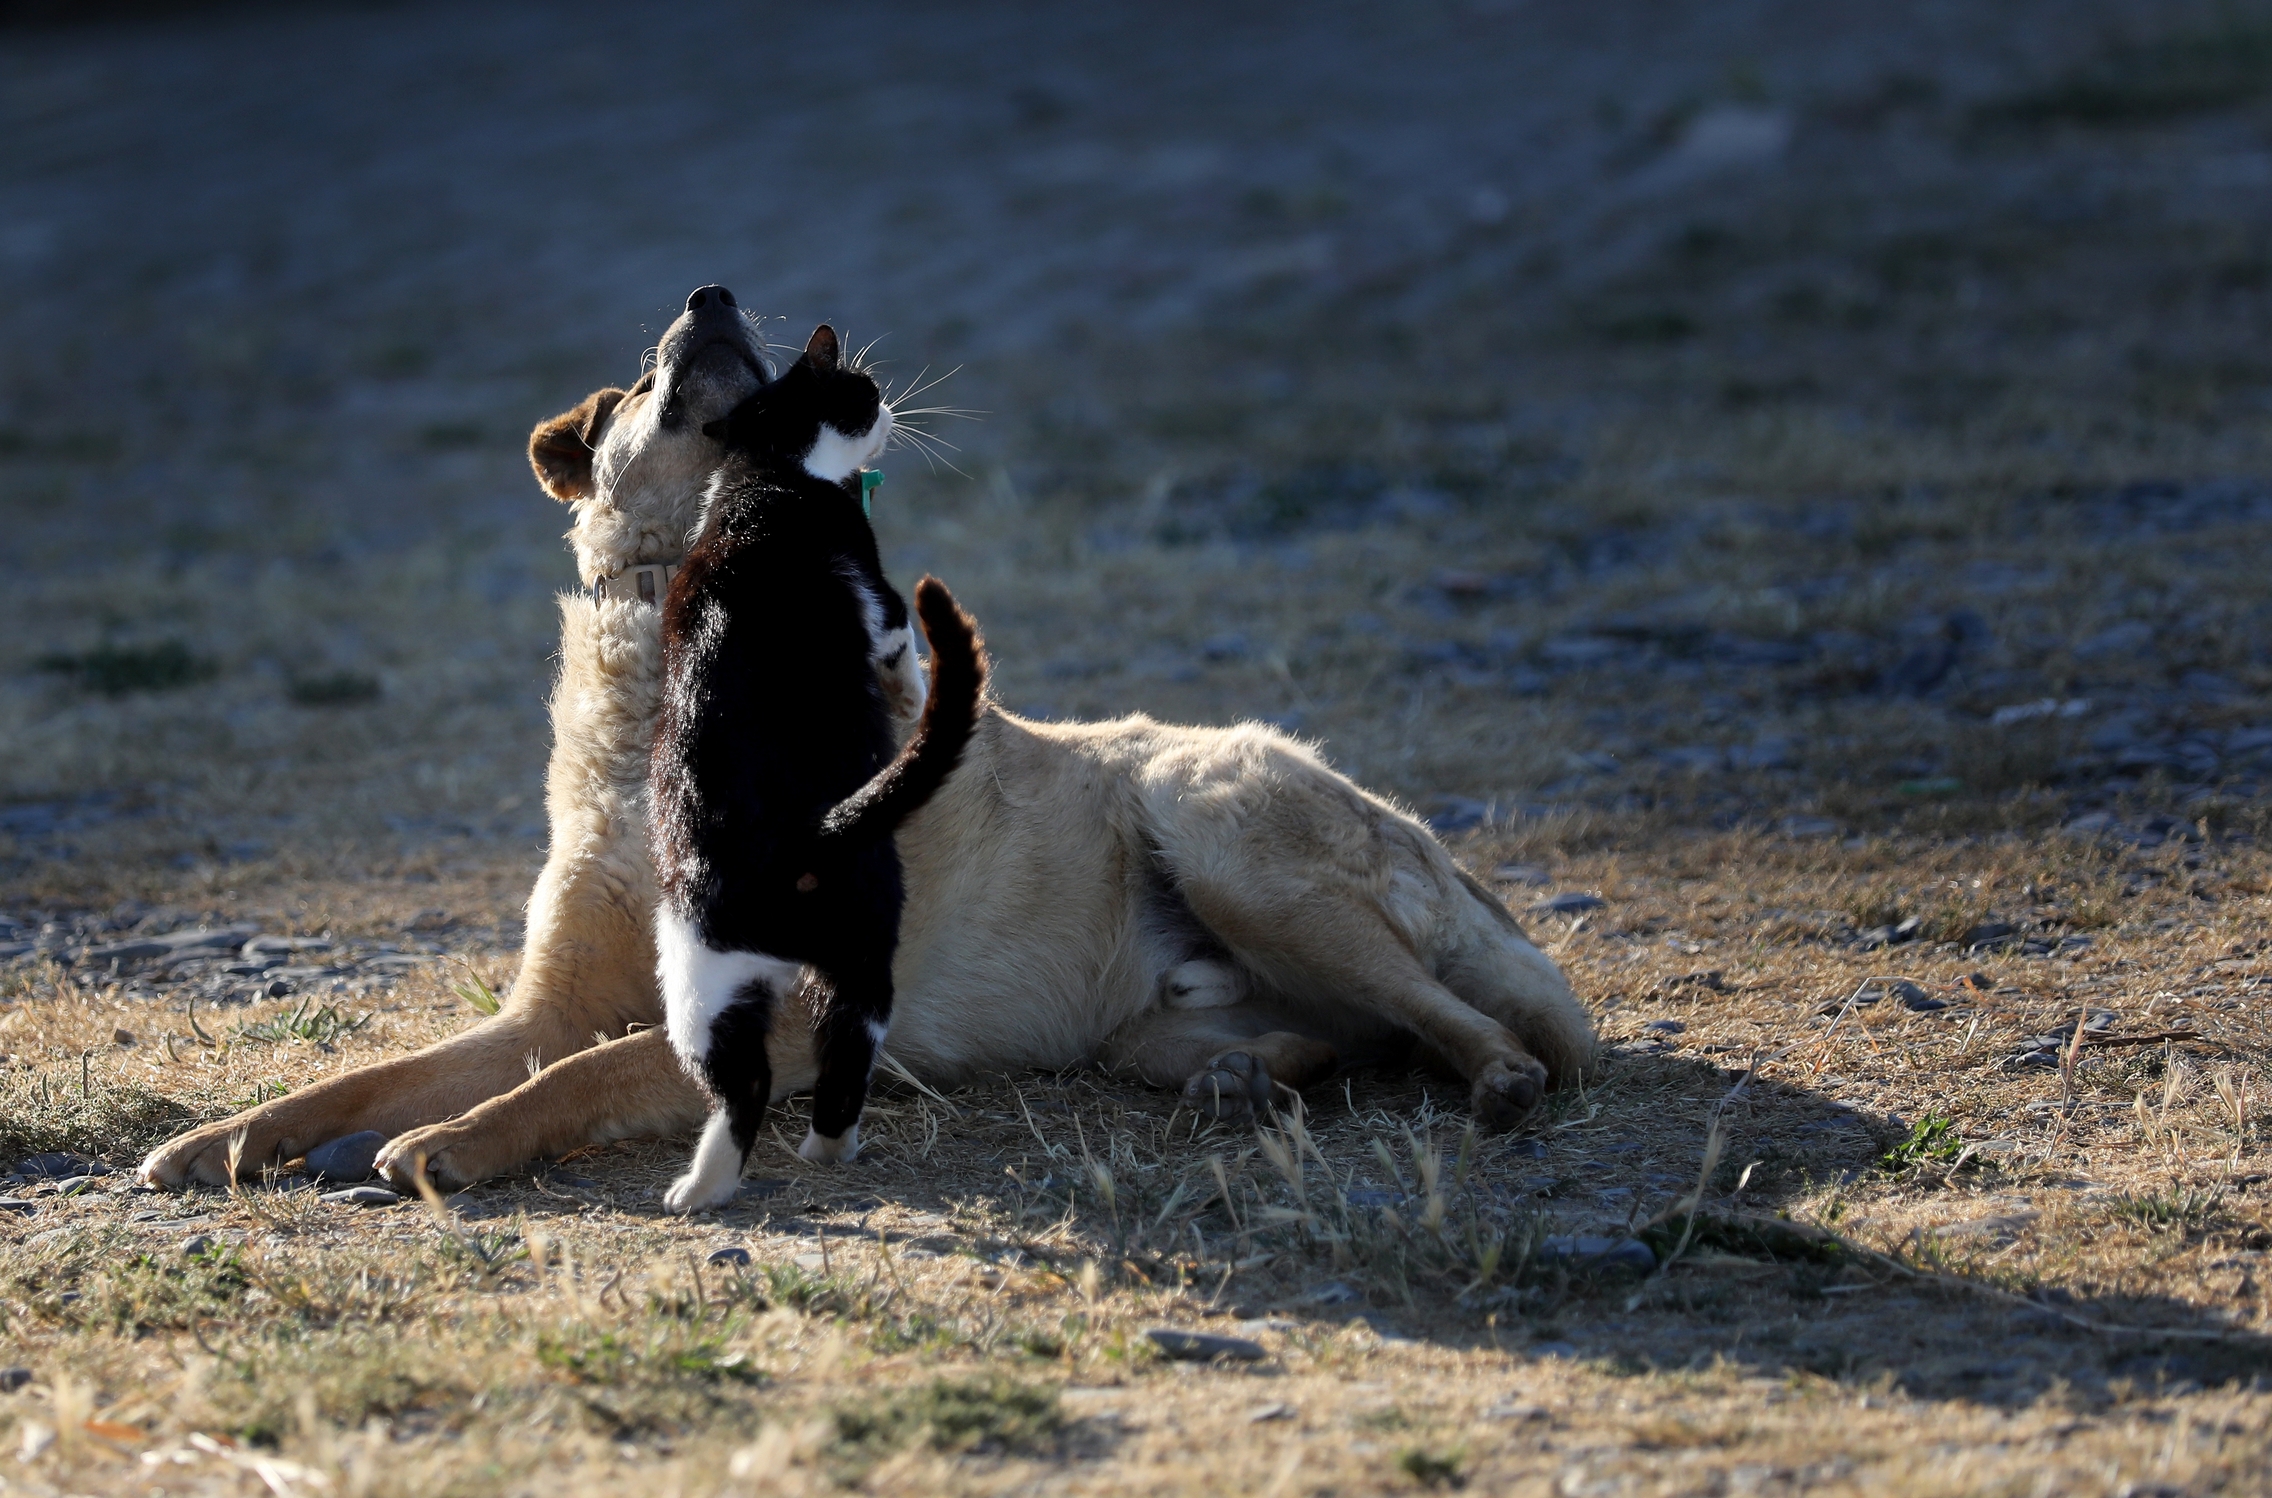 Adorable kitten strikes up funny friendship with dog in Turkey